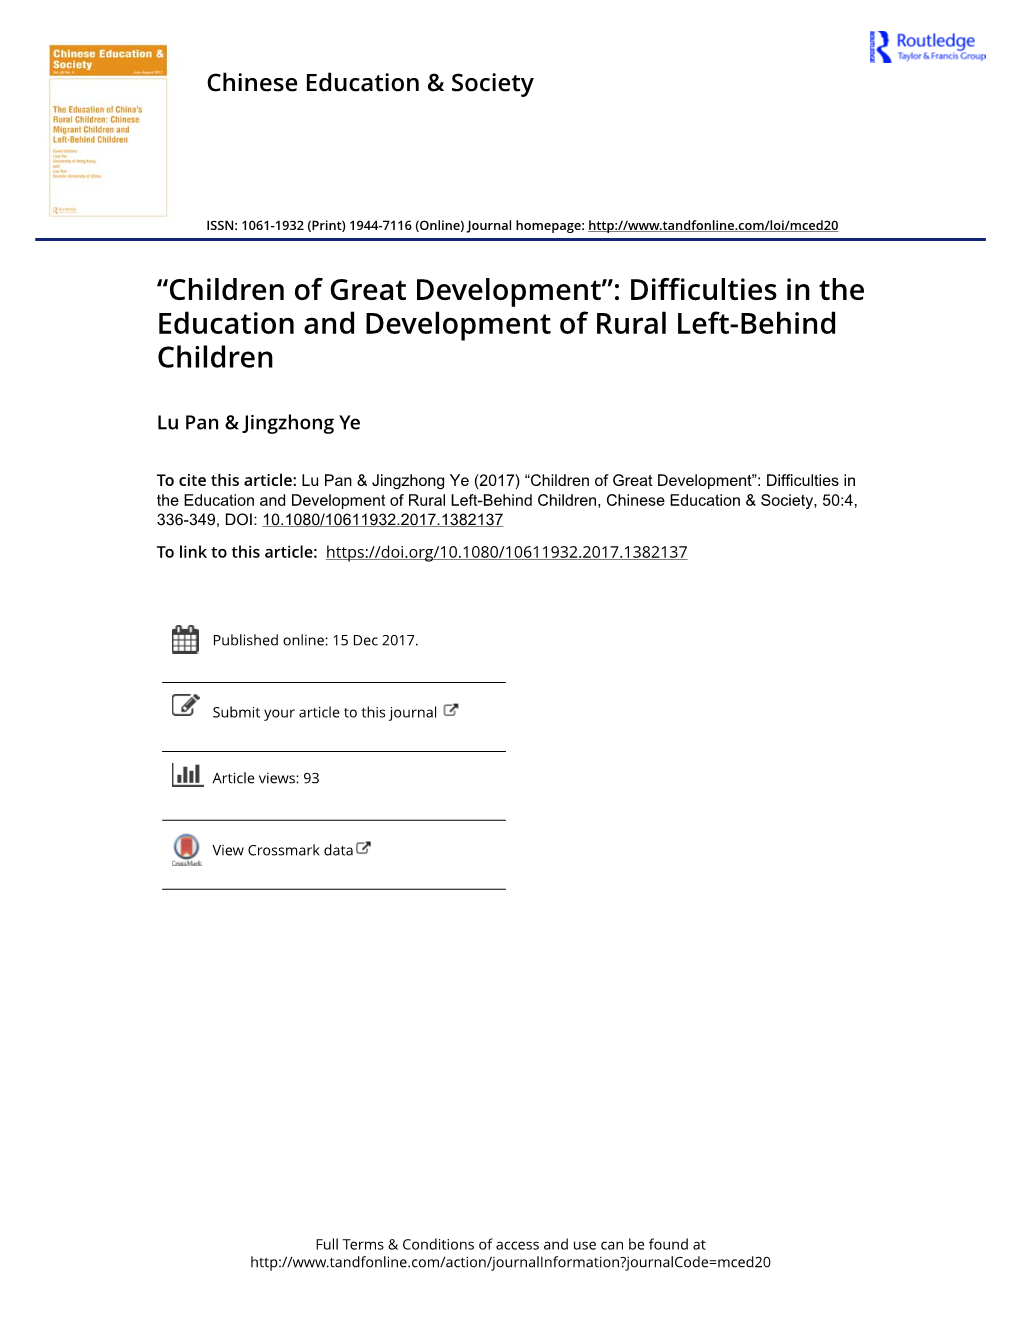 Difficulties in the Education and Development of Rural Left-Behind Children